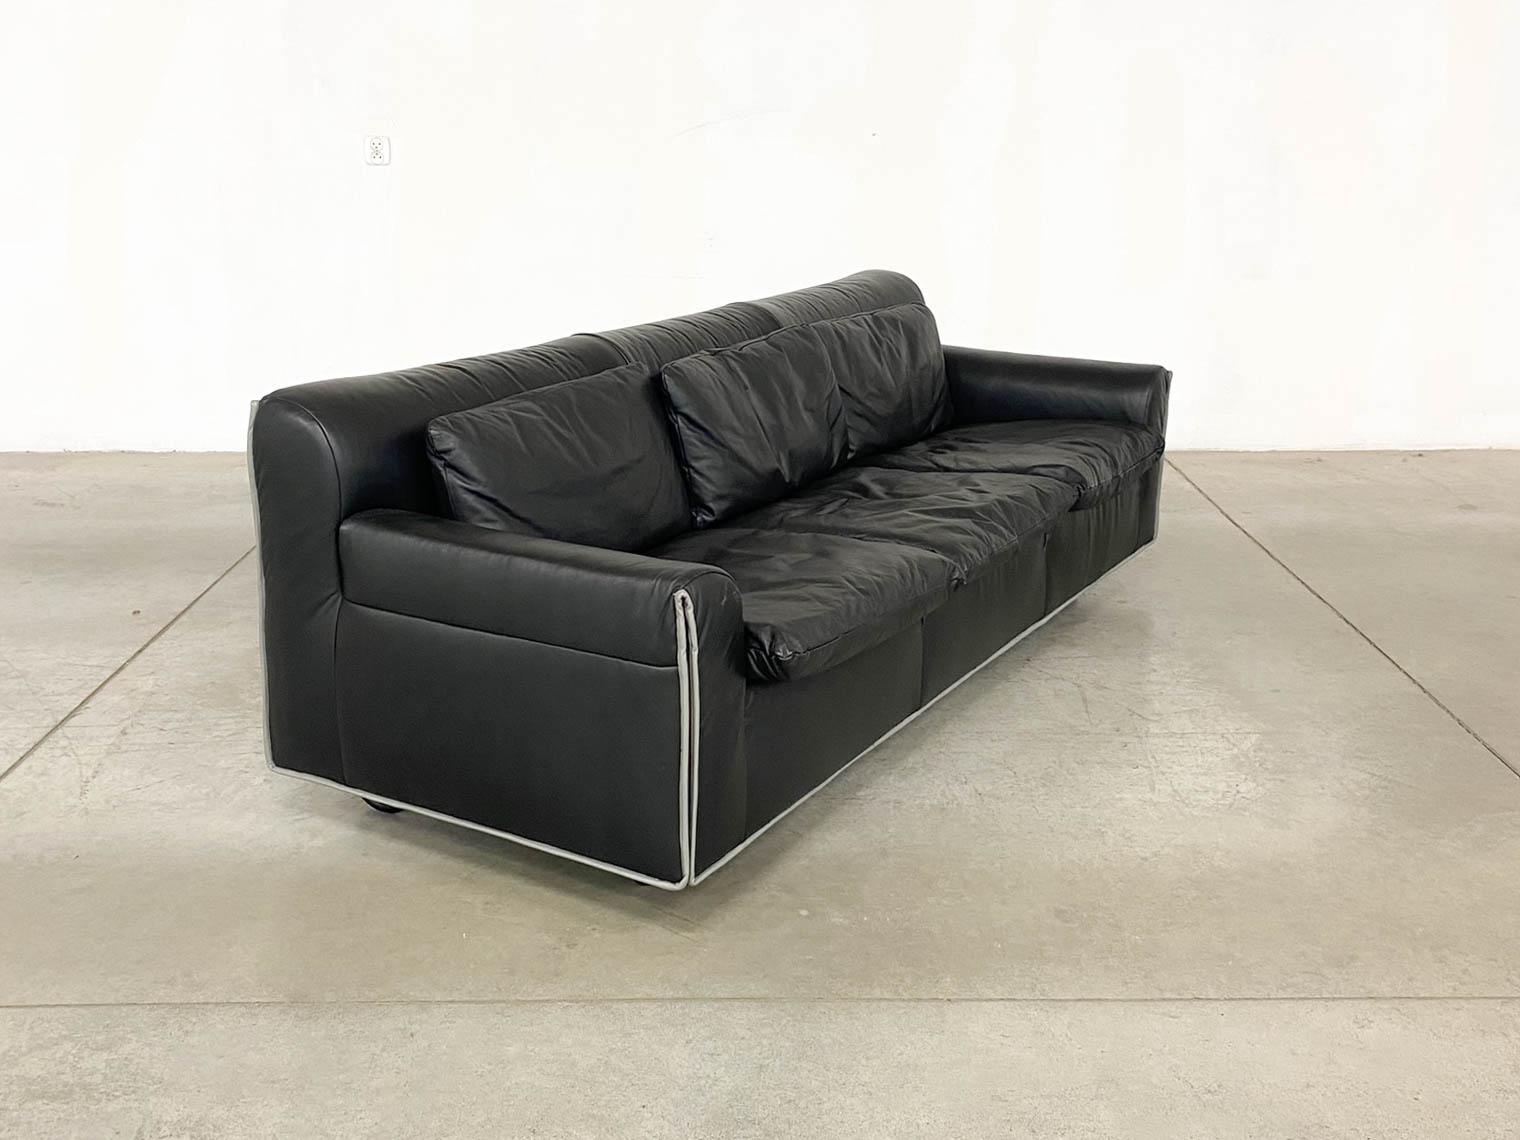 Post-Modern Heli 3-Seater Leather Sofa by Otto Zapf for Knoll, 1980s For Sale